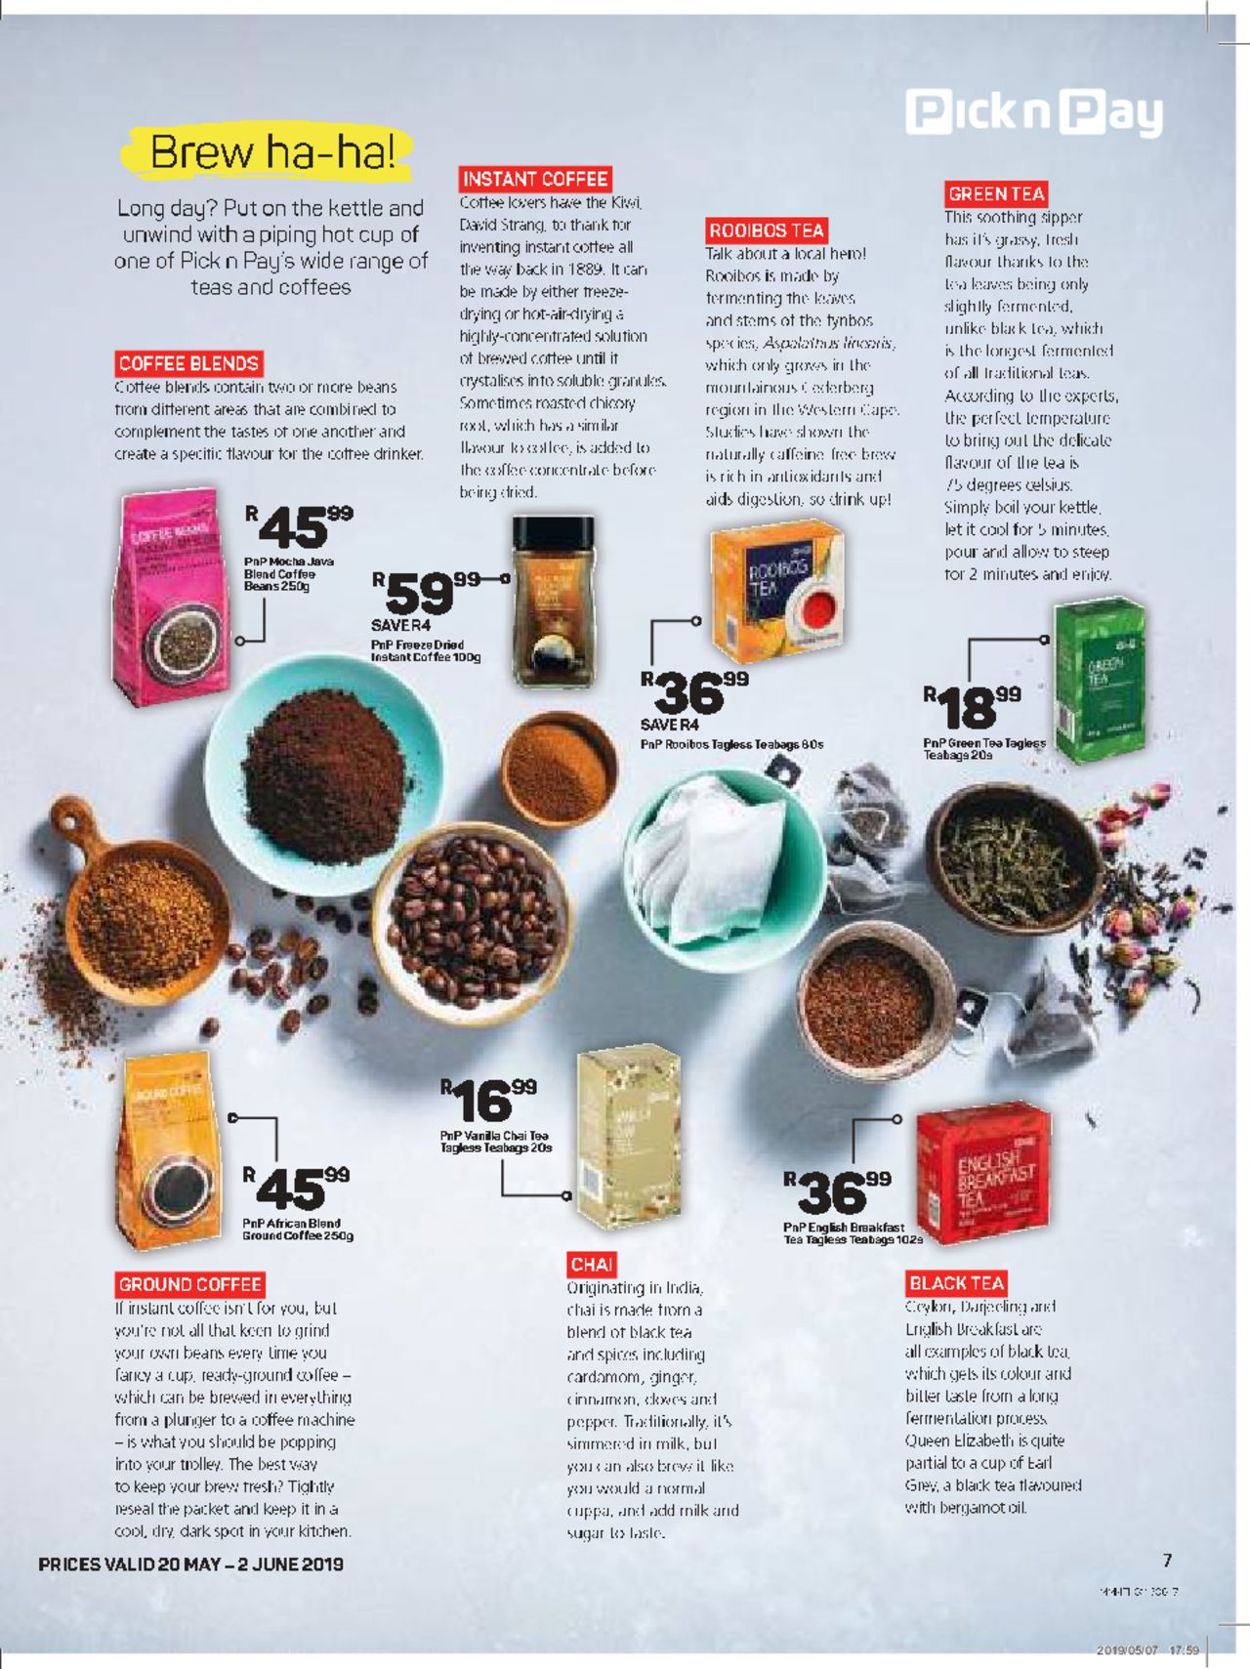 Pick n Pay Catalogue - 2019/05/20-2019/06/02 (Page 7)